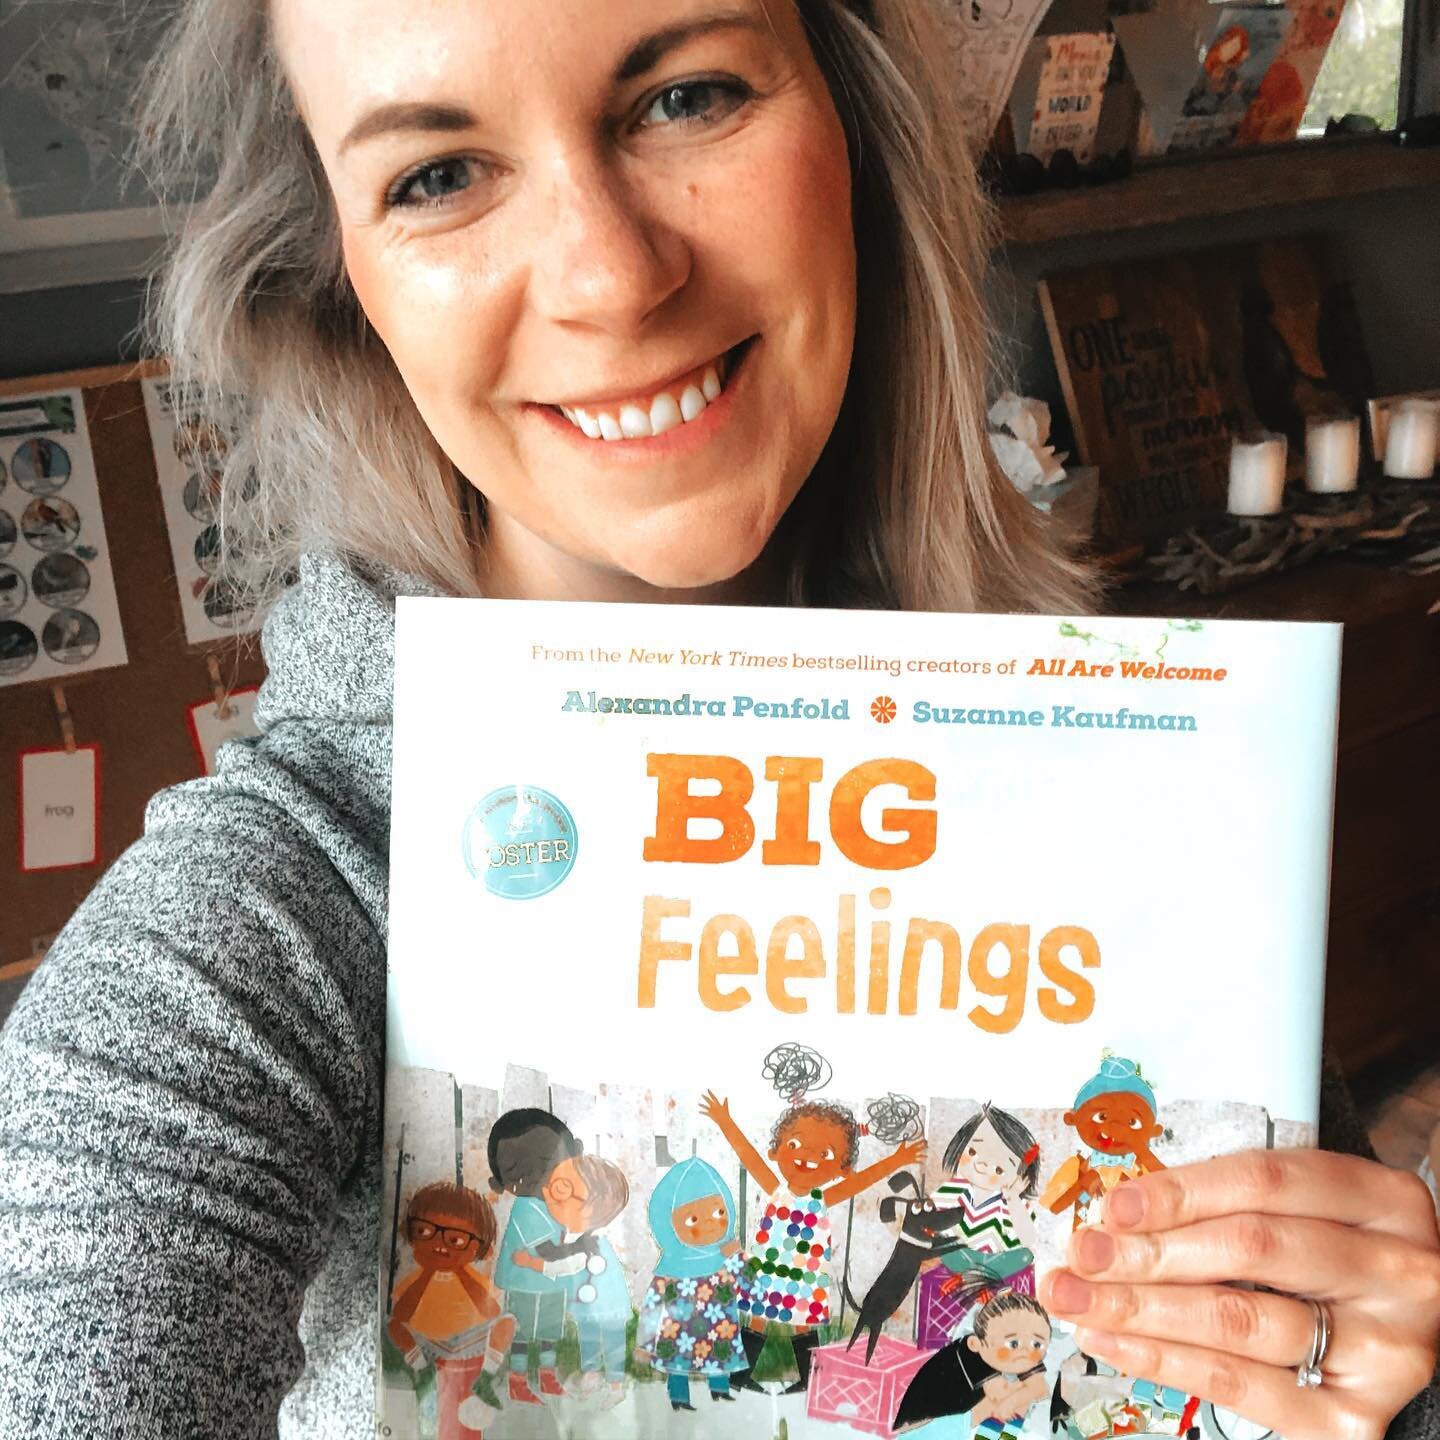 &ldquo;I have big feelings. 
You have them, too. 
How can I help? 
What can we do?&rdquo;

It&rsquo;s all fun and games until big feelings clash and tumble and tug and compete. Alexandra Penfold does it again with this bright rhyming picture book abo